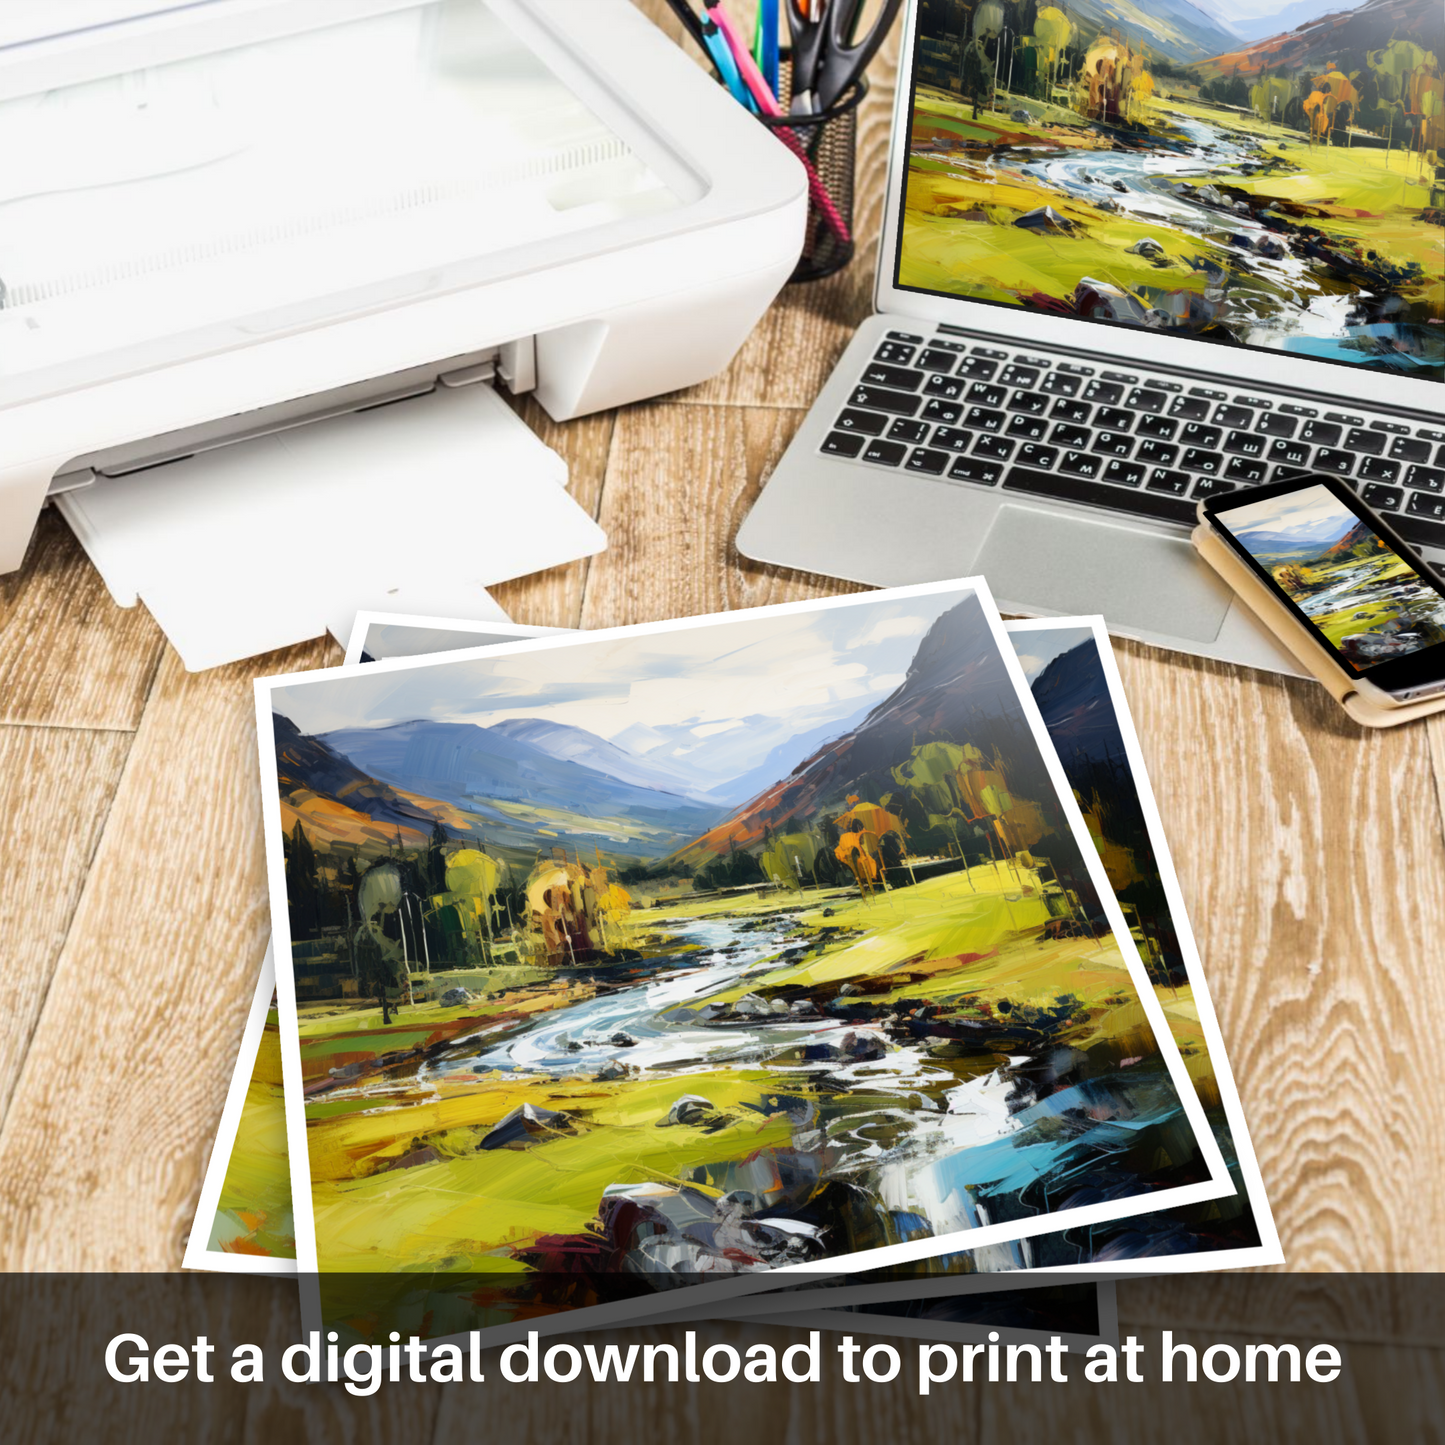 Downloadable and printable picture of Glen Lyon, Perthshire